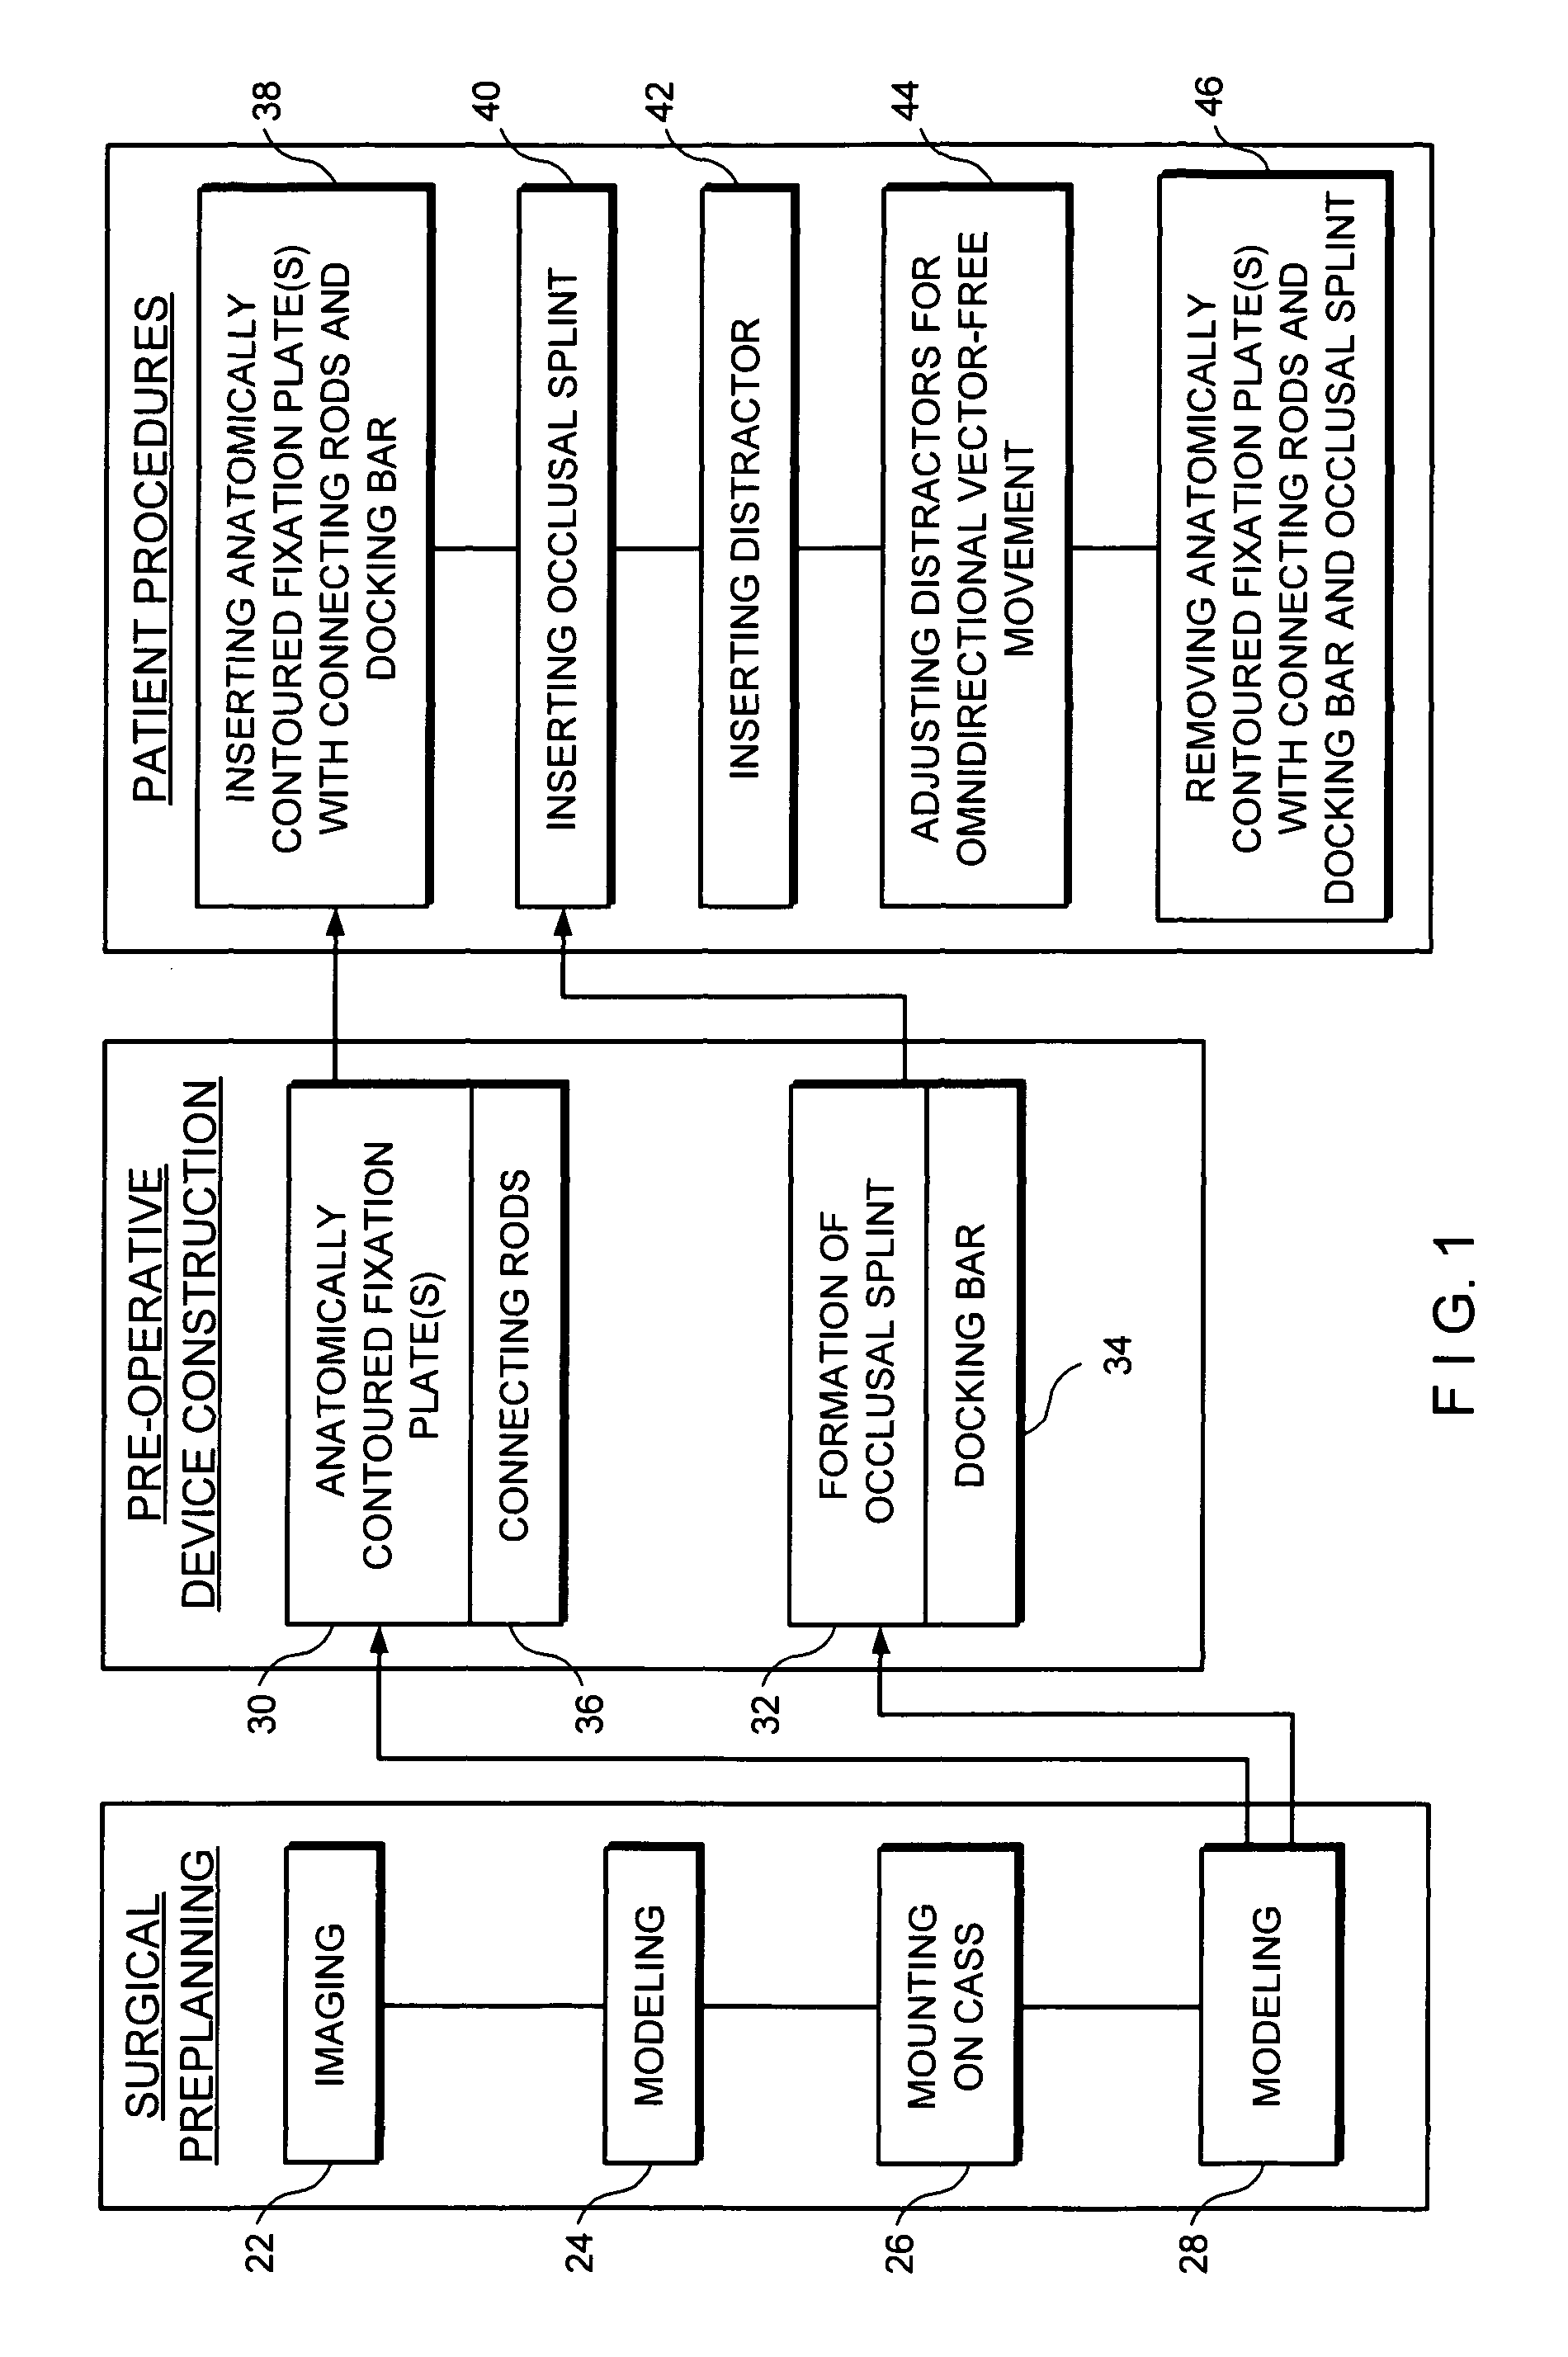 Computer-aided system of orthopedic surgery